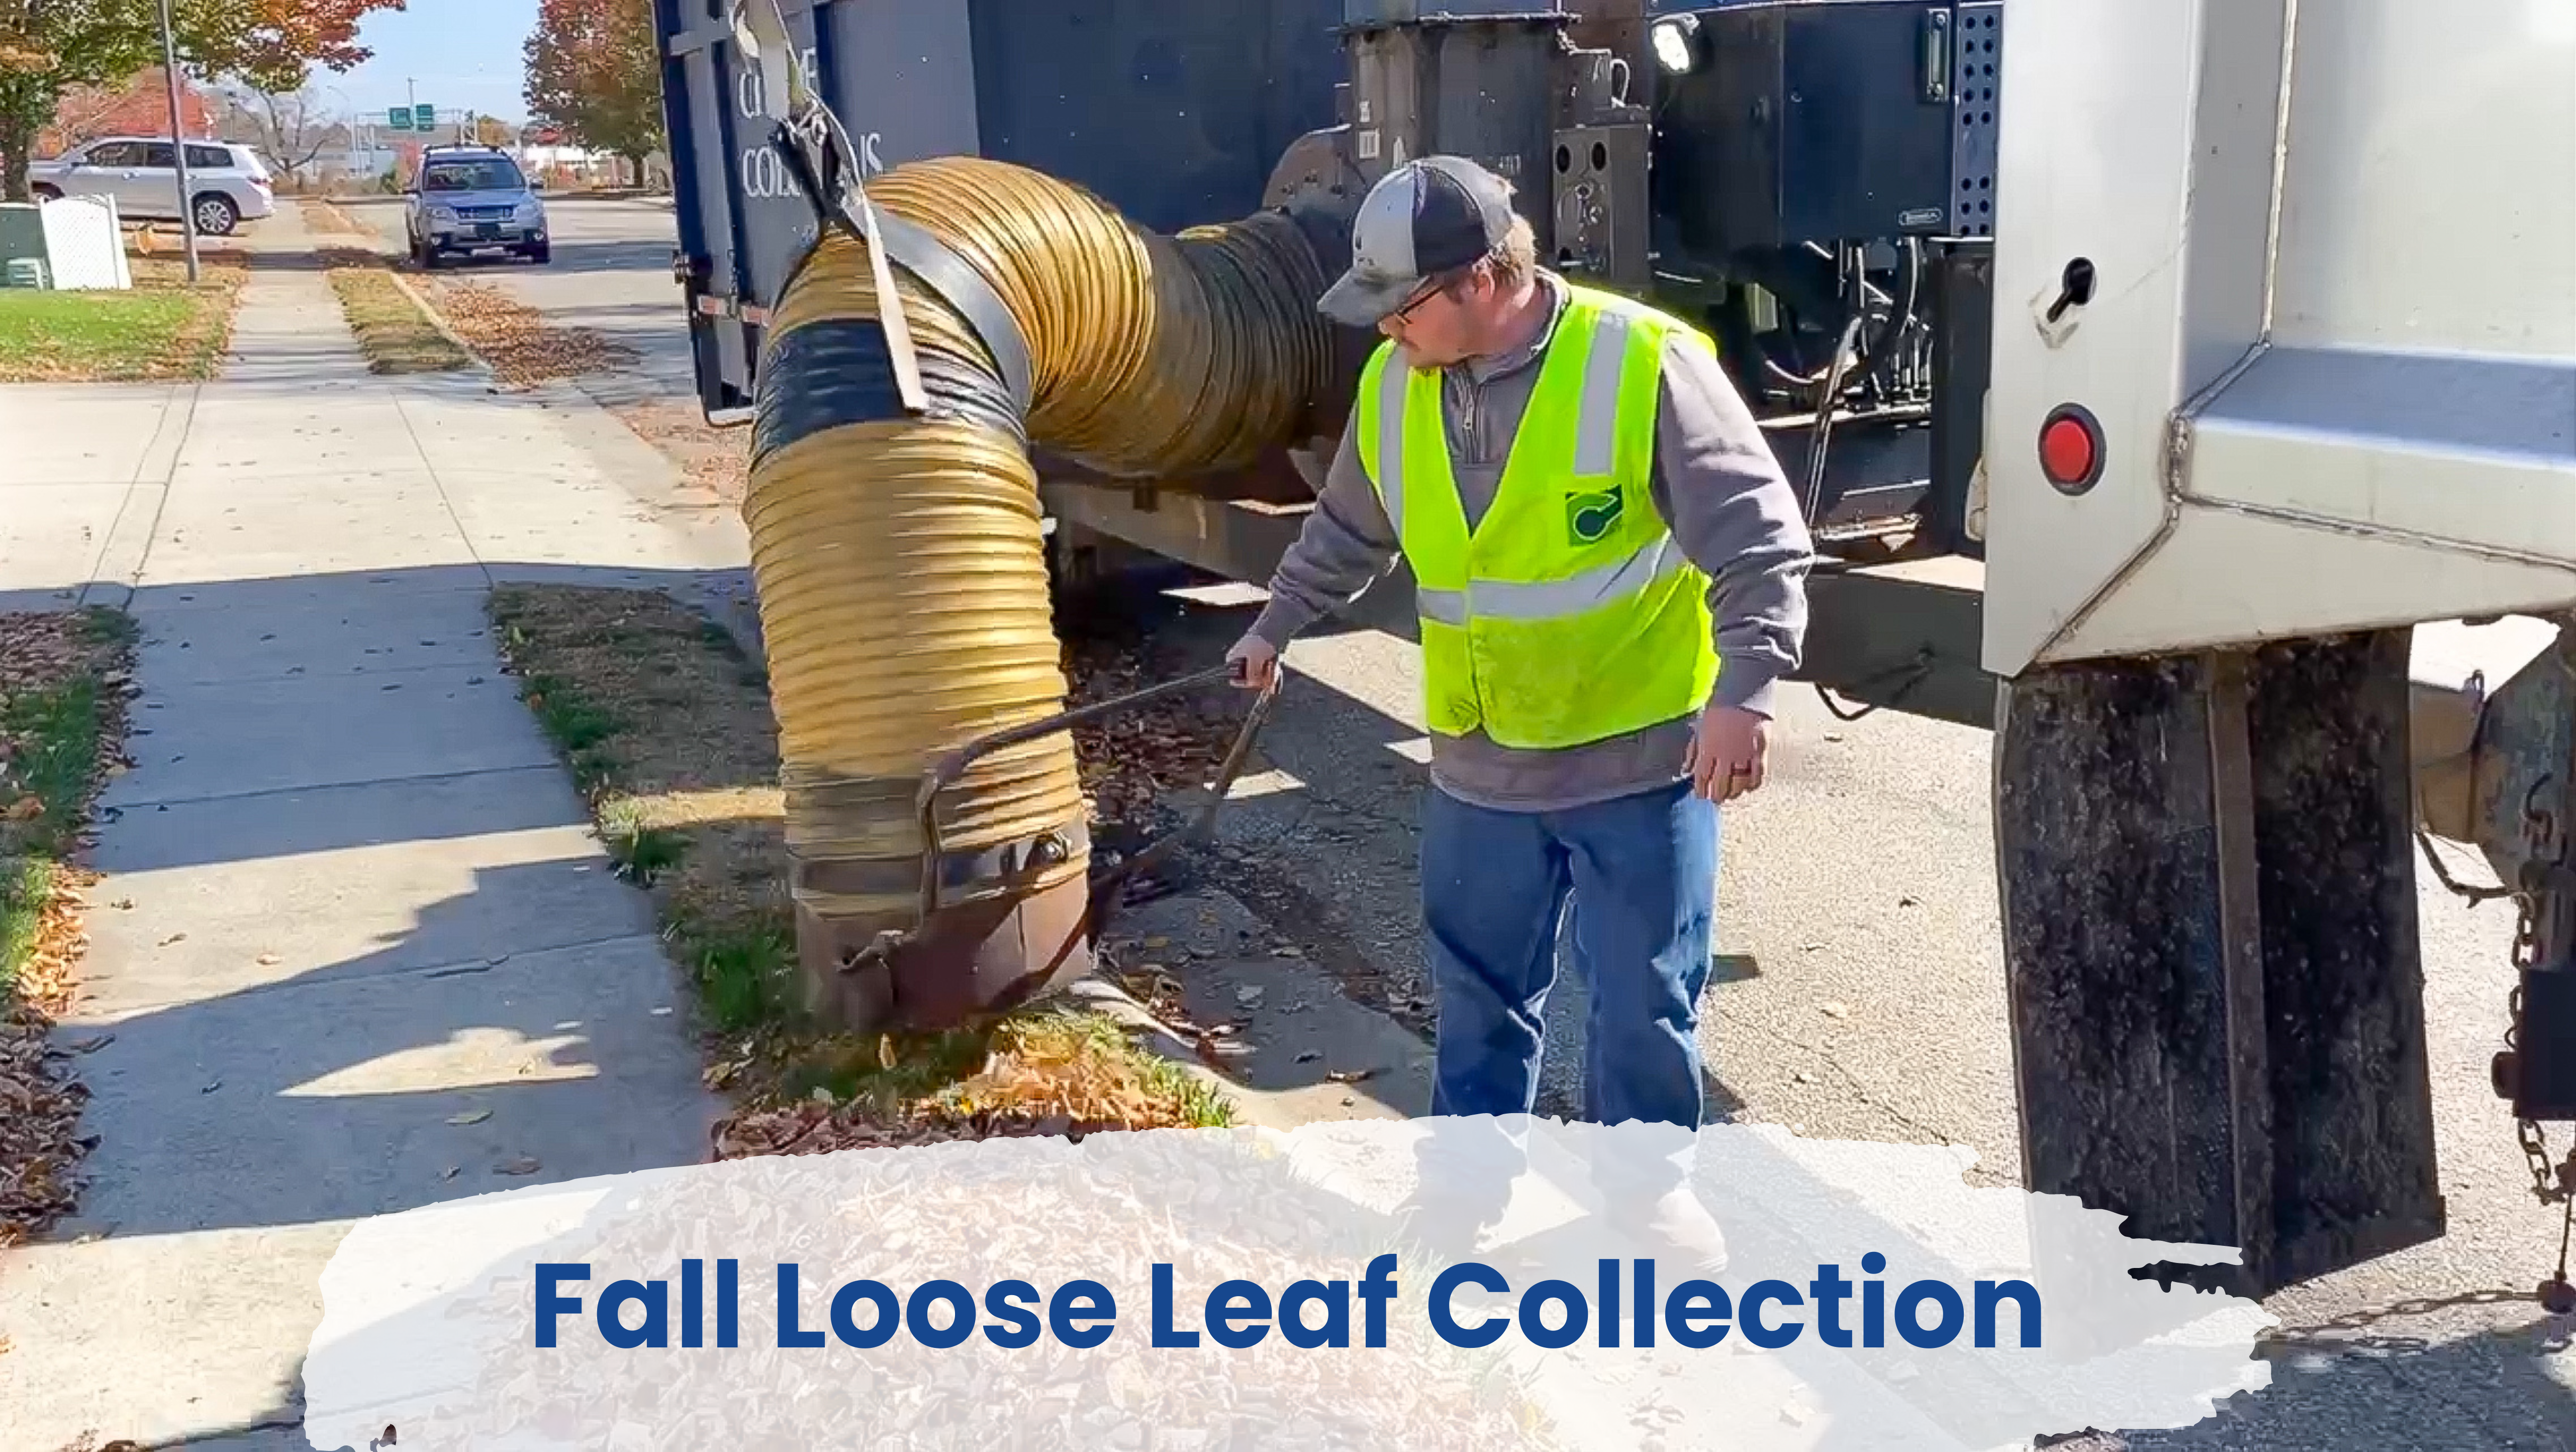 DPW worker collecting leaves with leaf vac